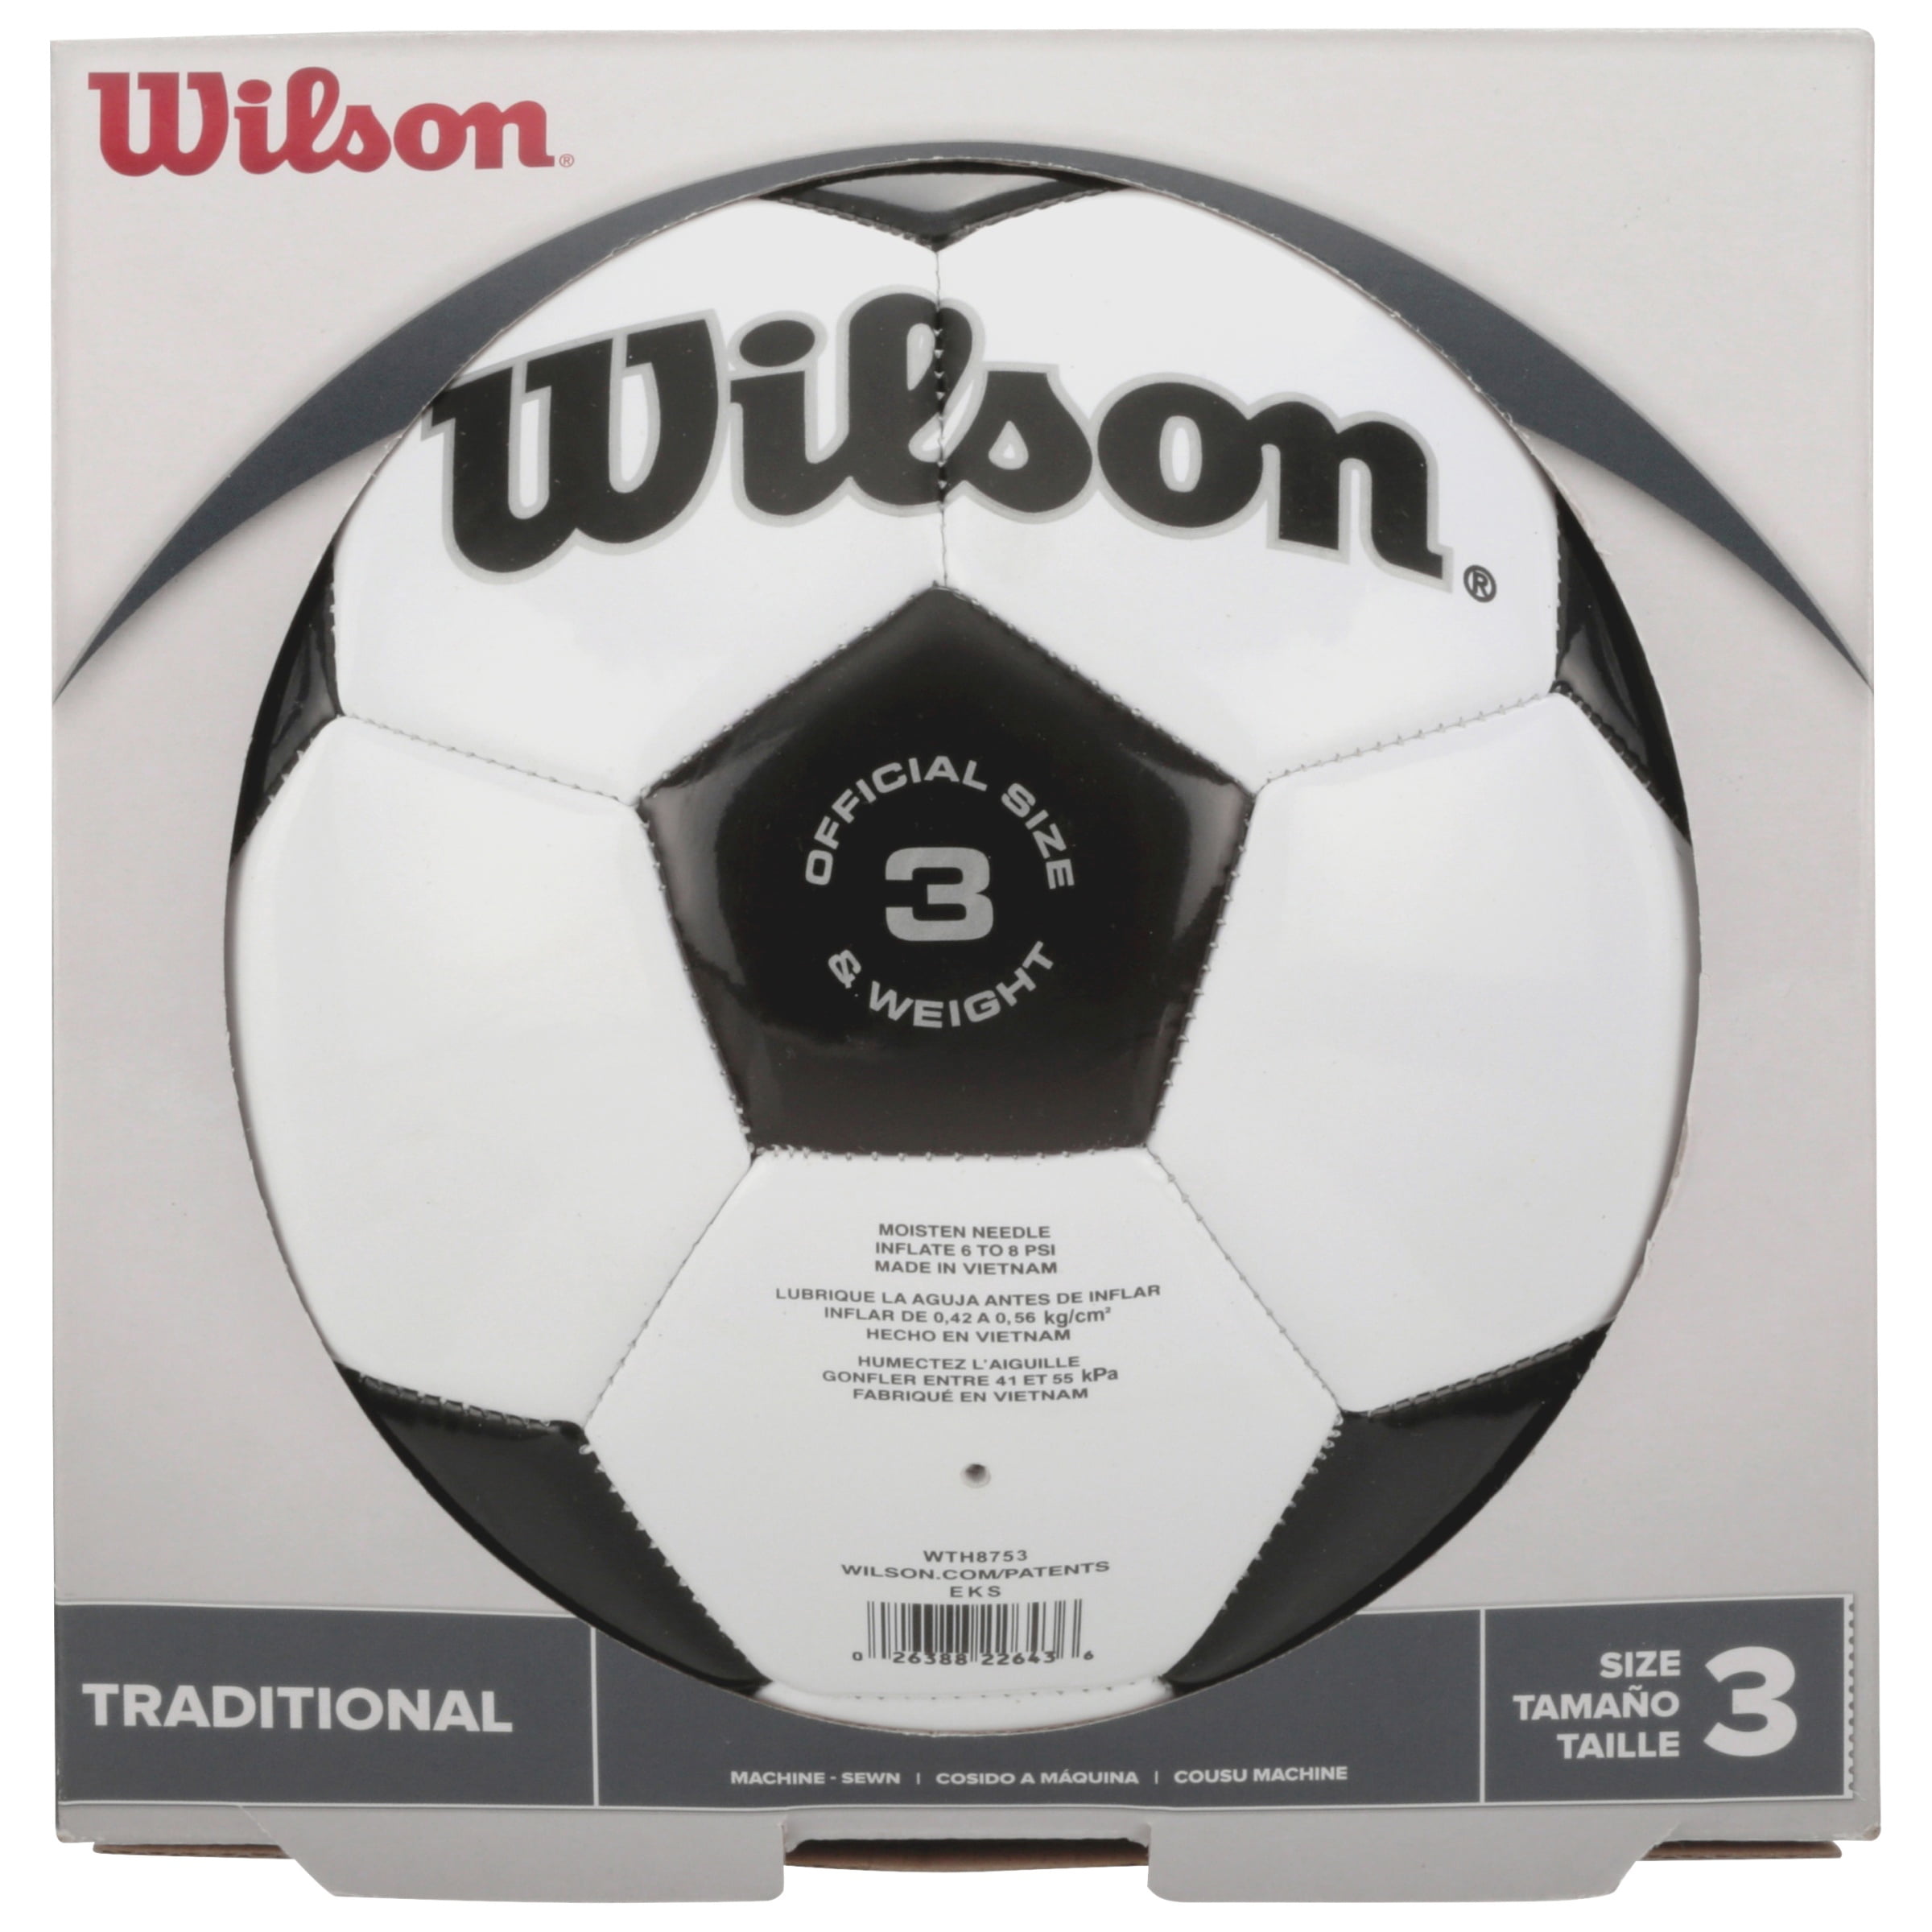 WILSON TRADITIONAL  SOCCER BALL  SIZE #3 